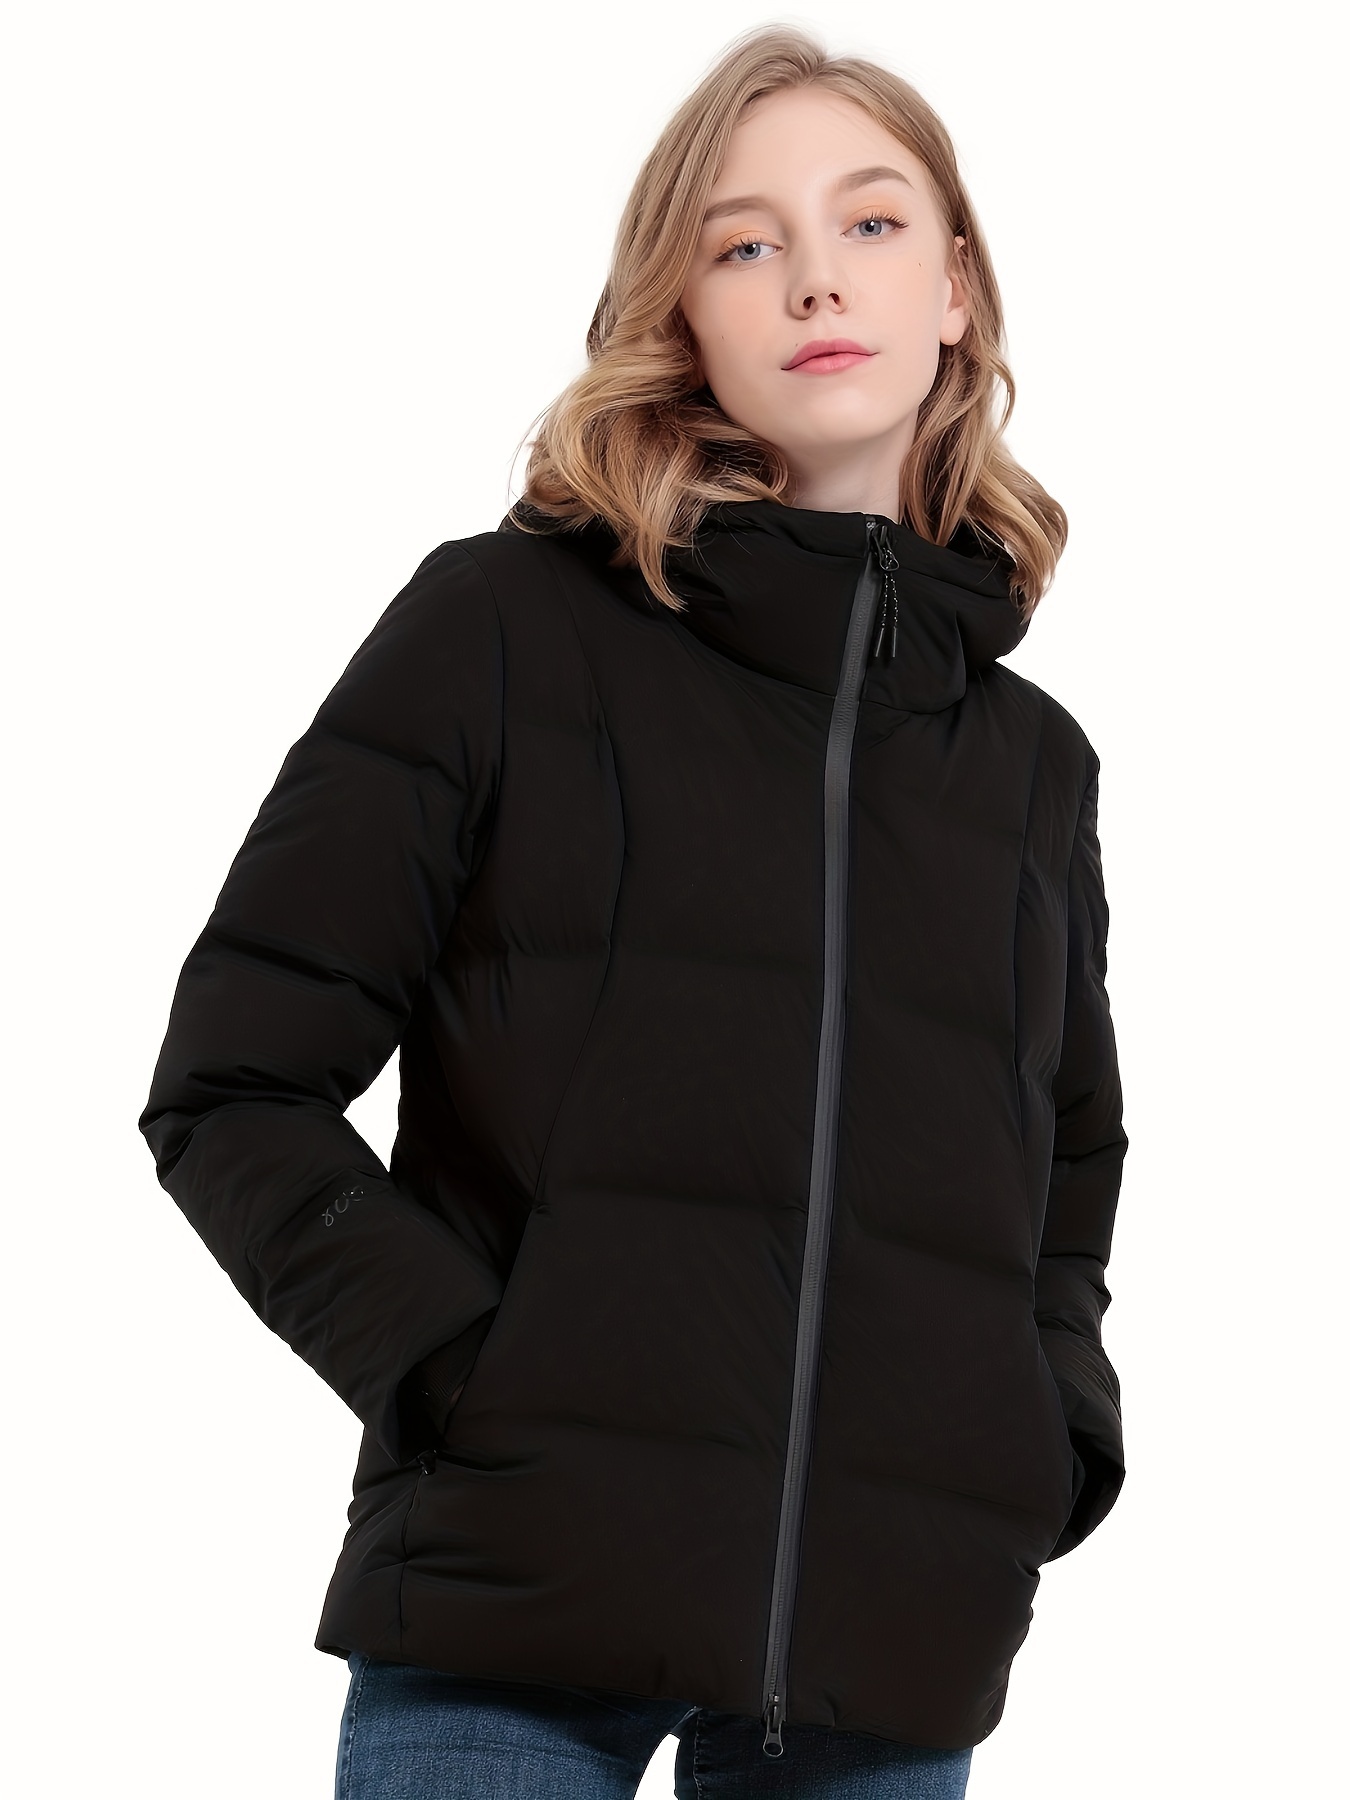 North Face Jackets for Women